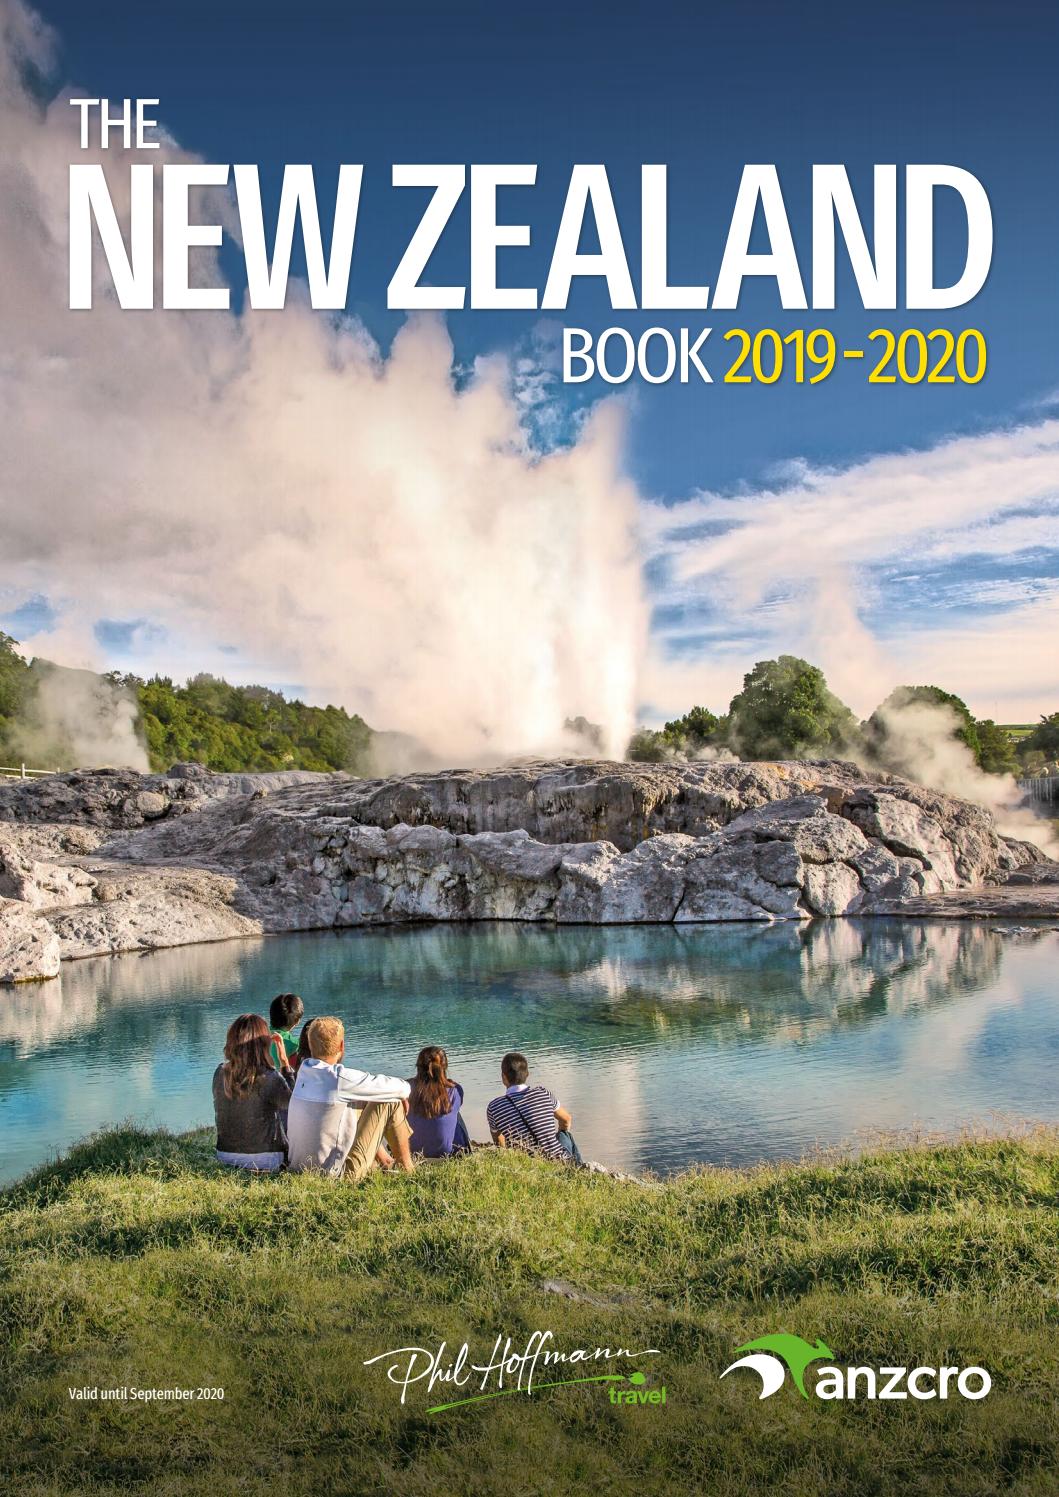 Pergola Alu Brico Depot Inspirant the New Zealand Book 2019 20 Phil Hoffmann by Holiday